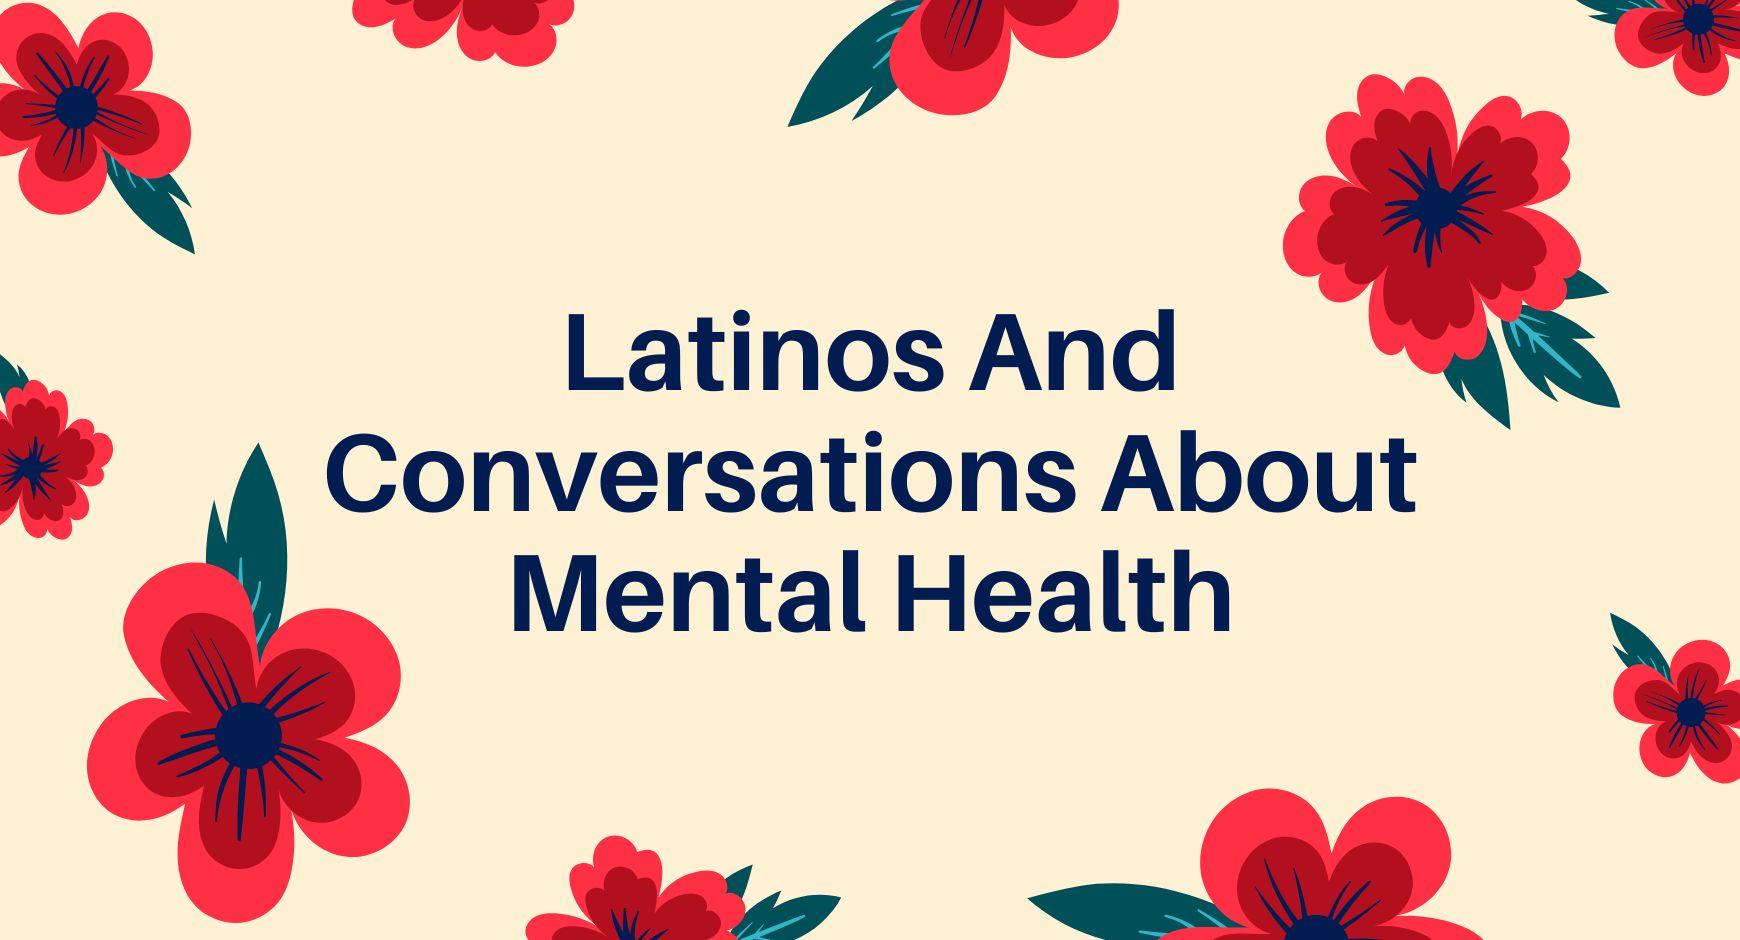 The words "Latinos And Conversations About Mental Health" surrounded by red flowers.